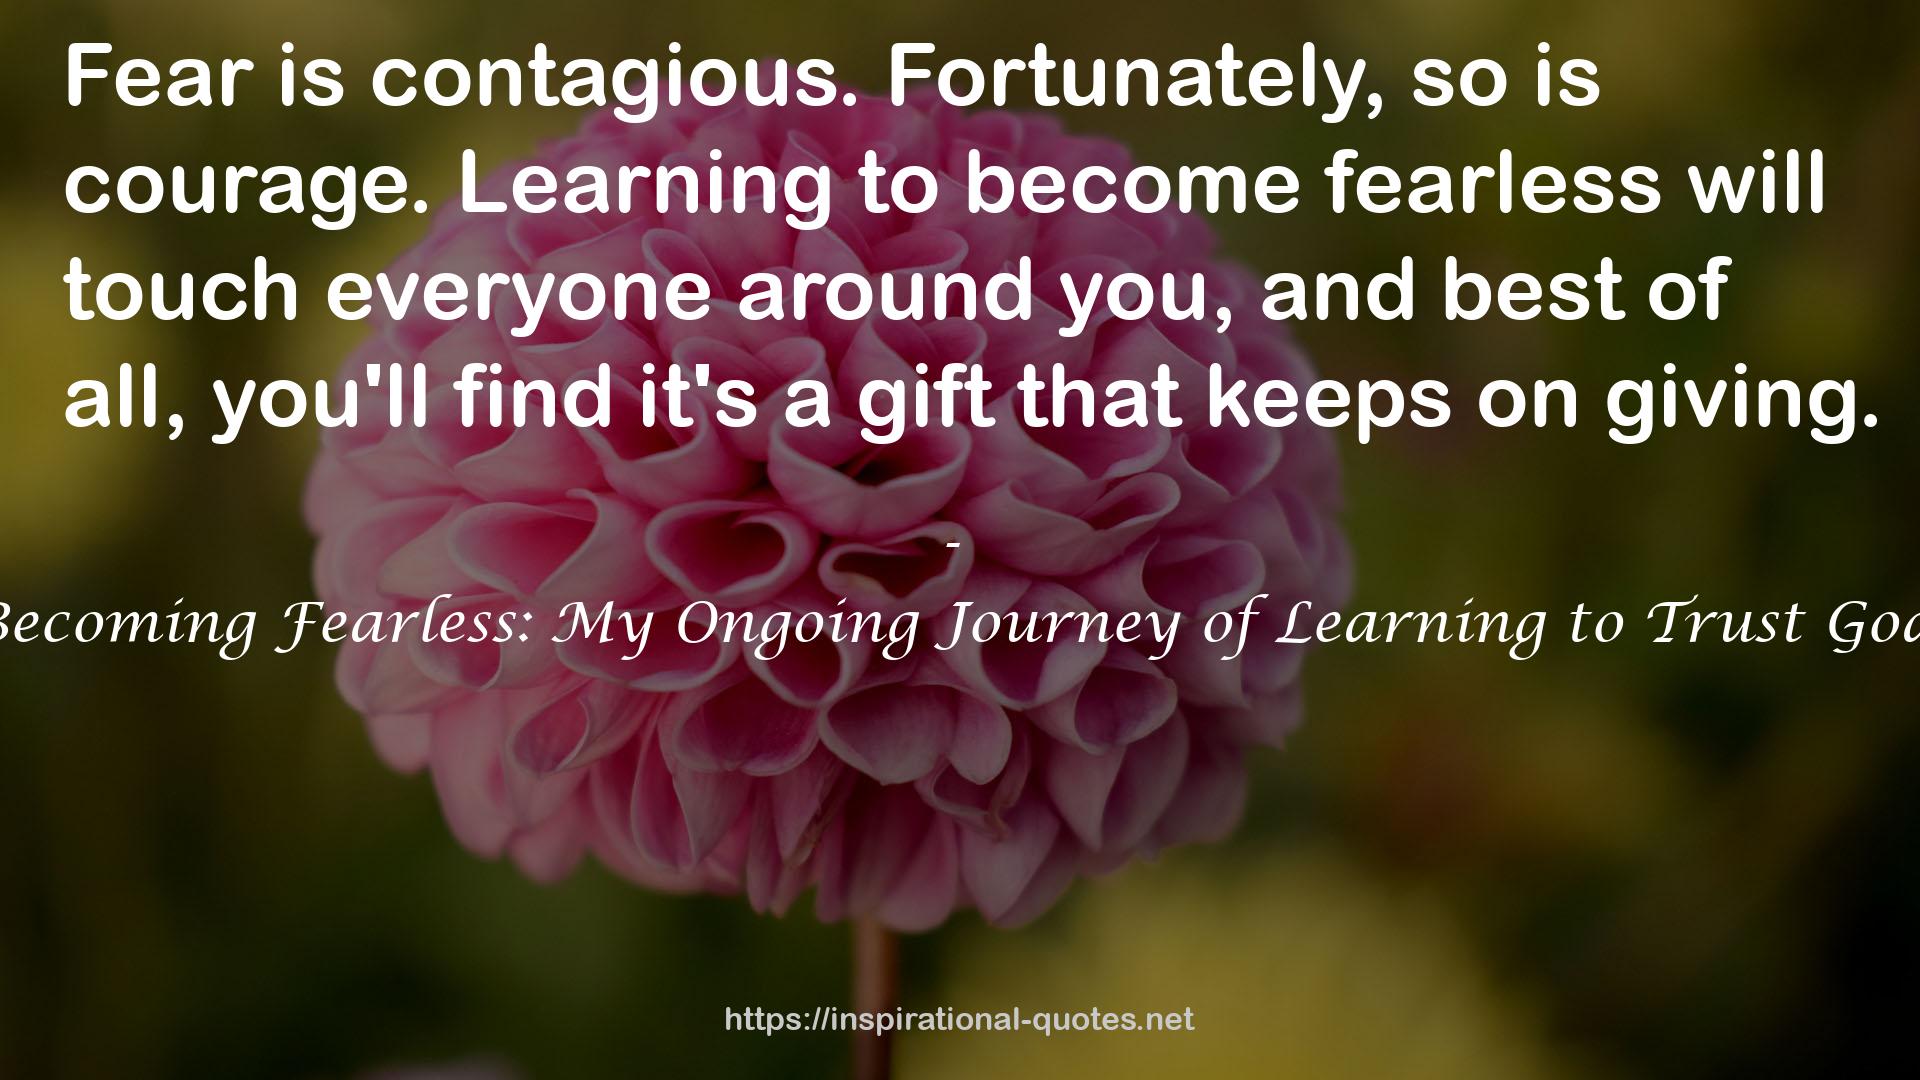 Becoming Fearless: My Ongoing Journey of Learning to Trust God QUOTES